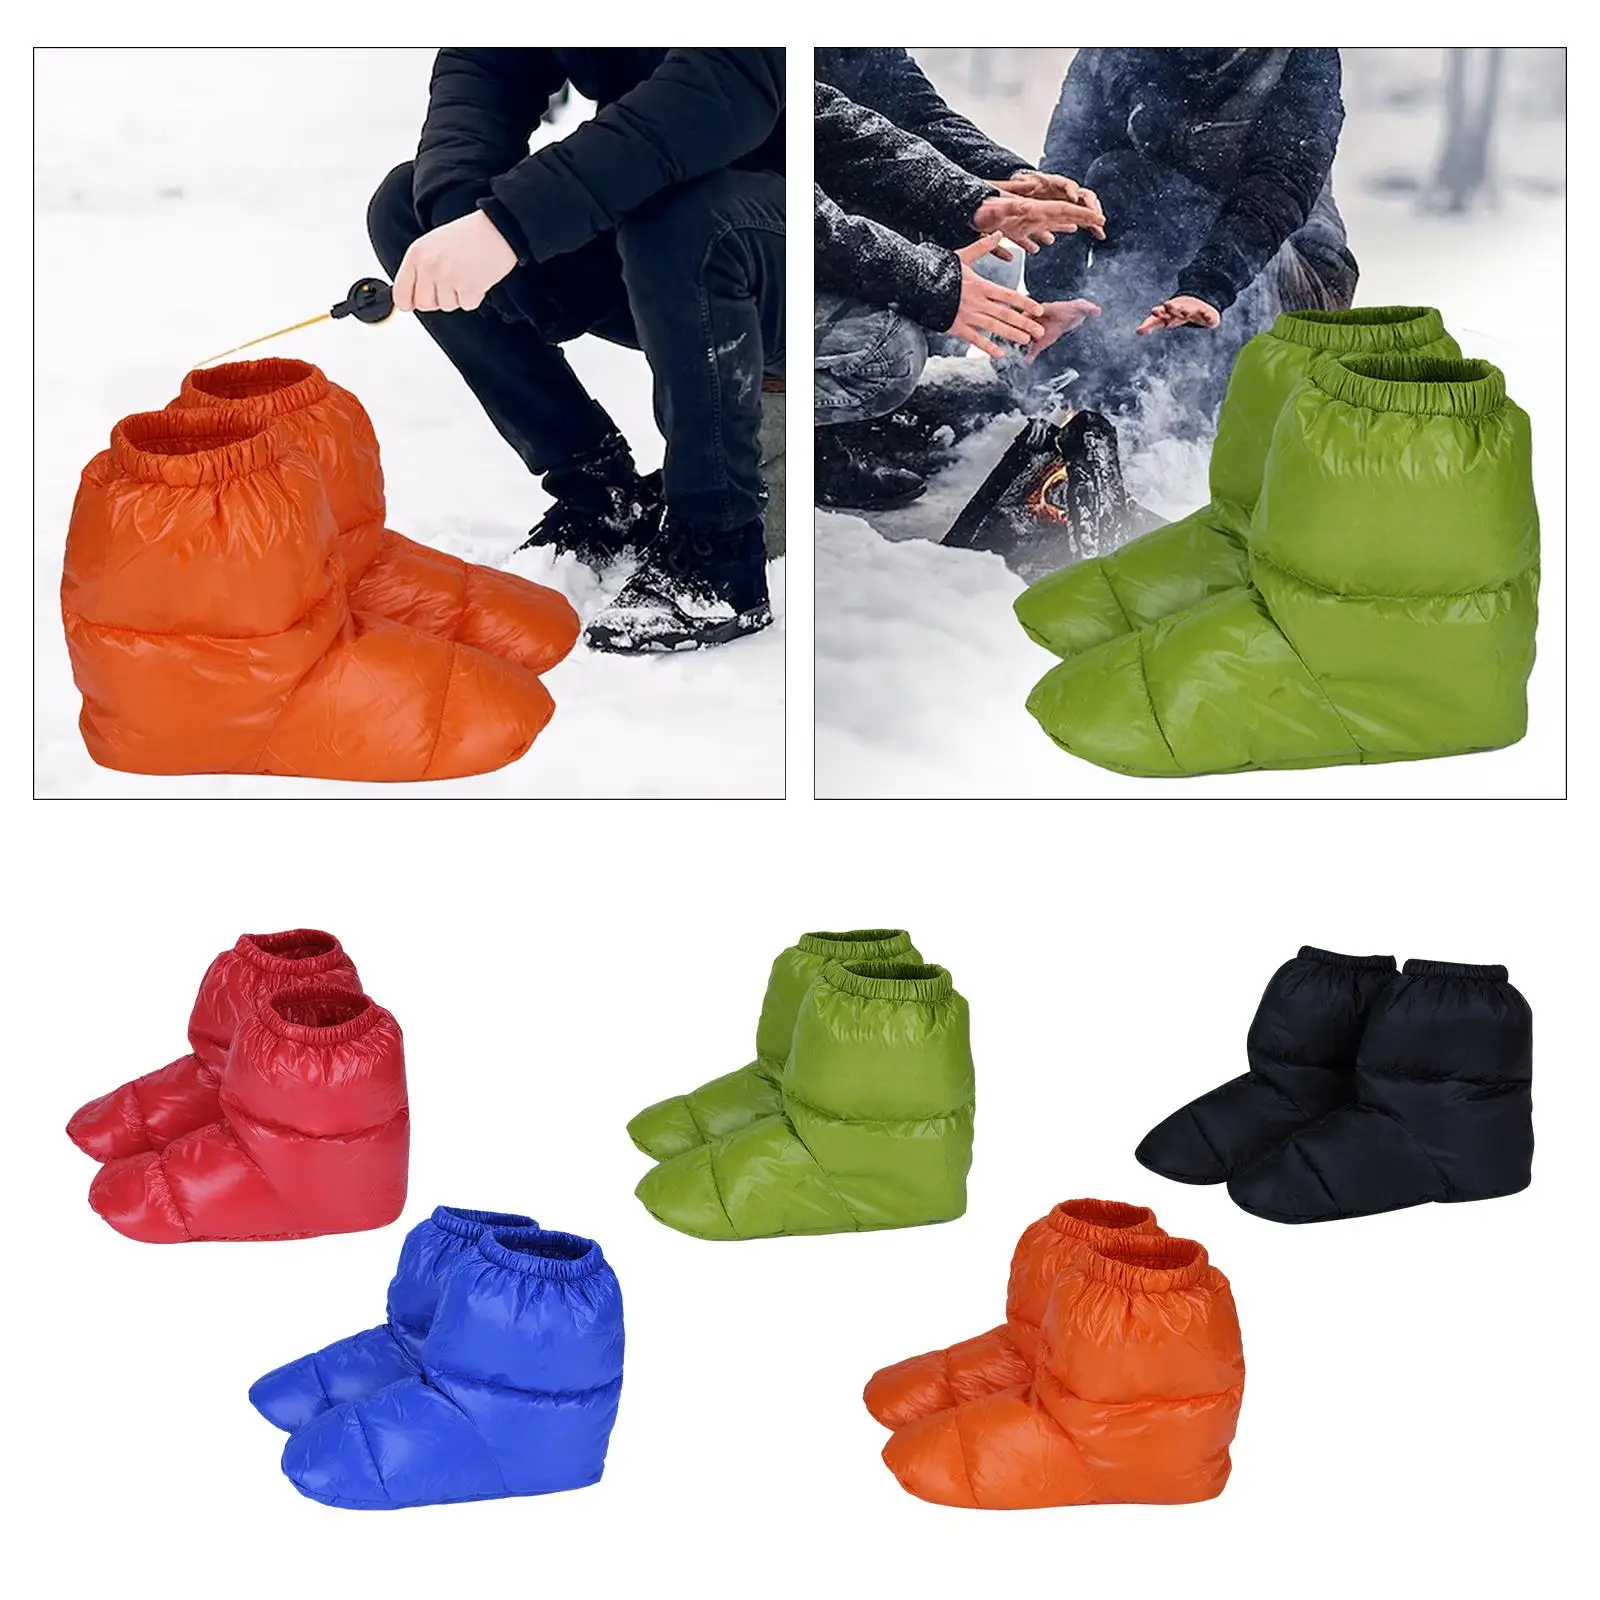 Winter Down Slippers Warm Bootie Shoes Ultralight Waterproof Keep Warm Cozy Snow Boots for Outdoor Skiing Fishing Hiking Indoor